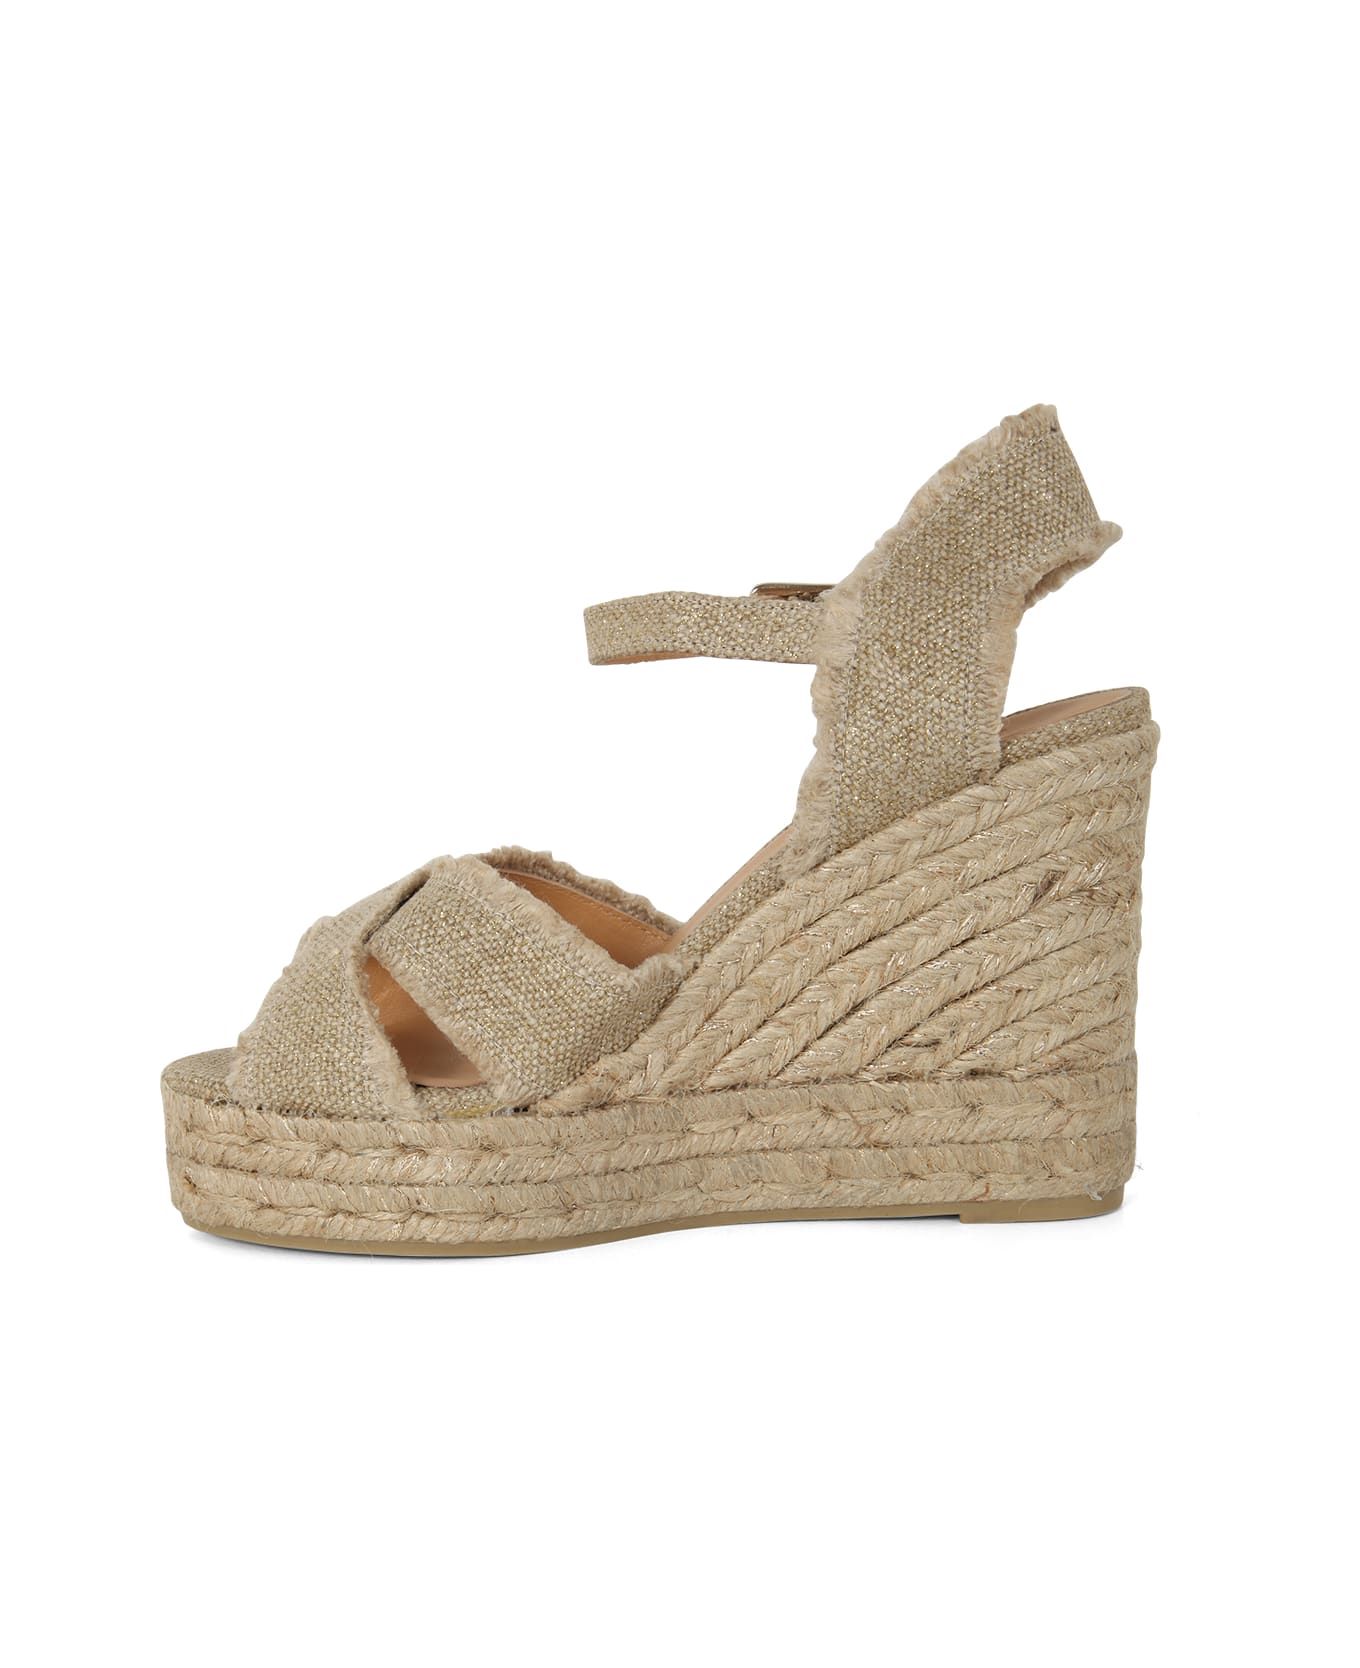 Castañer Bromelia Espadrilles With Belt On Ankles And Fringed Ankles - Light Gold サンダル